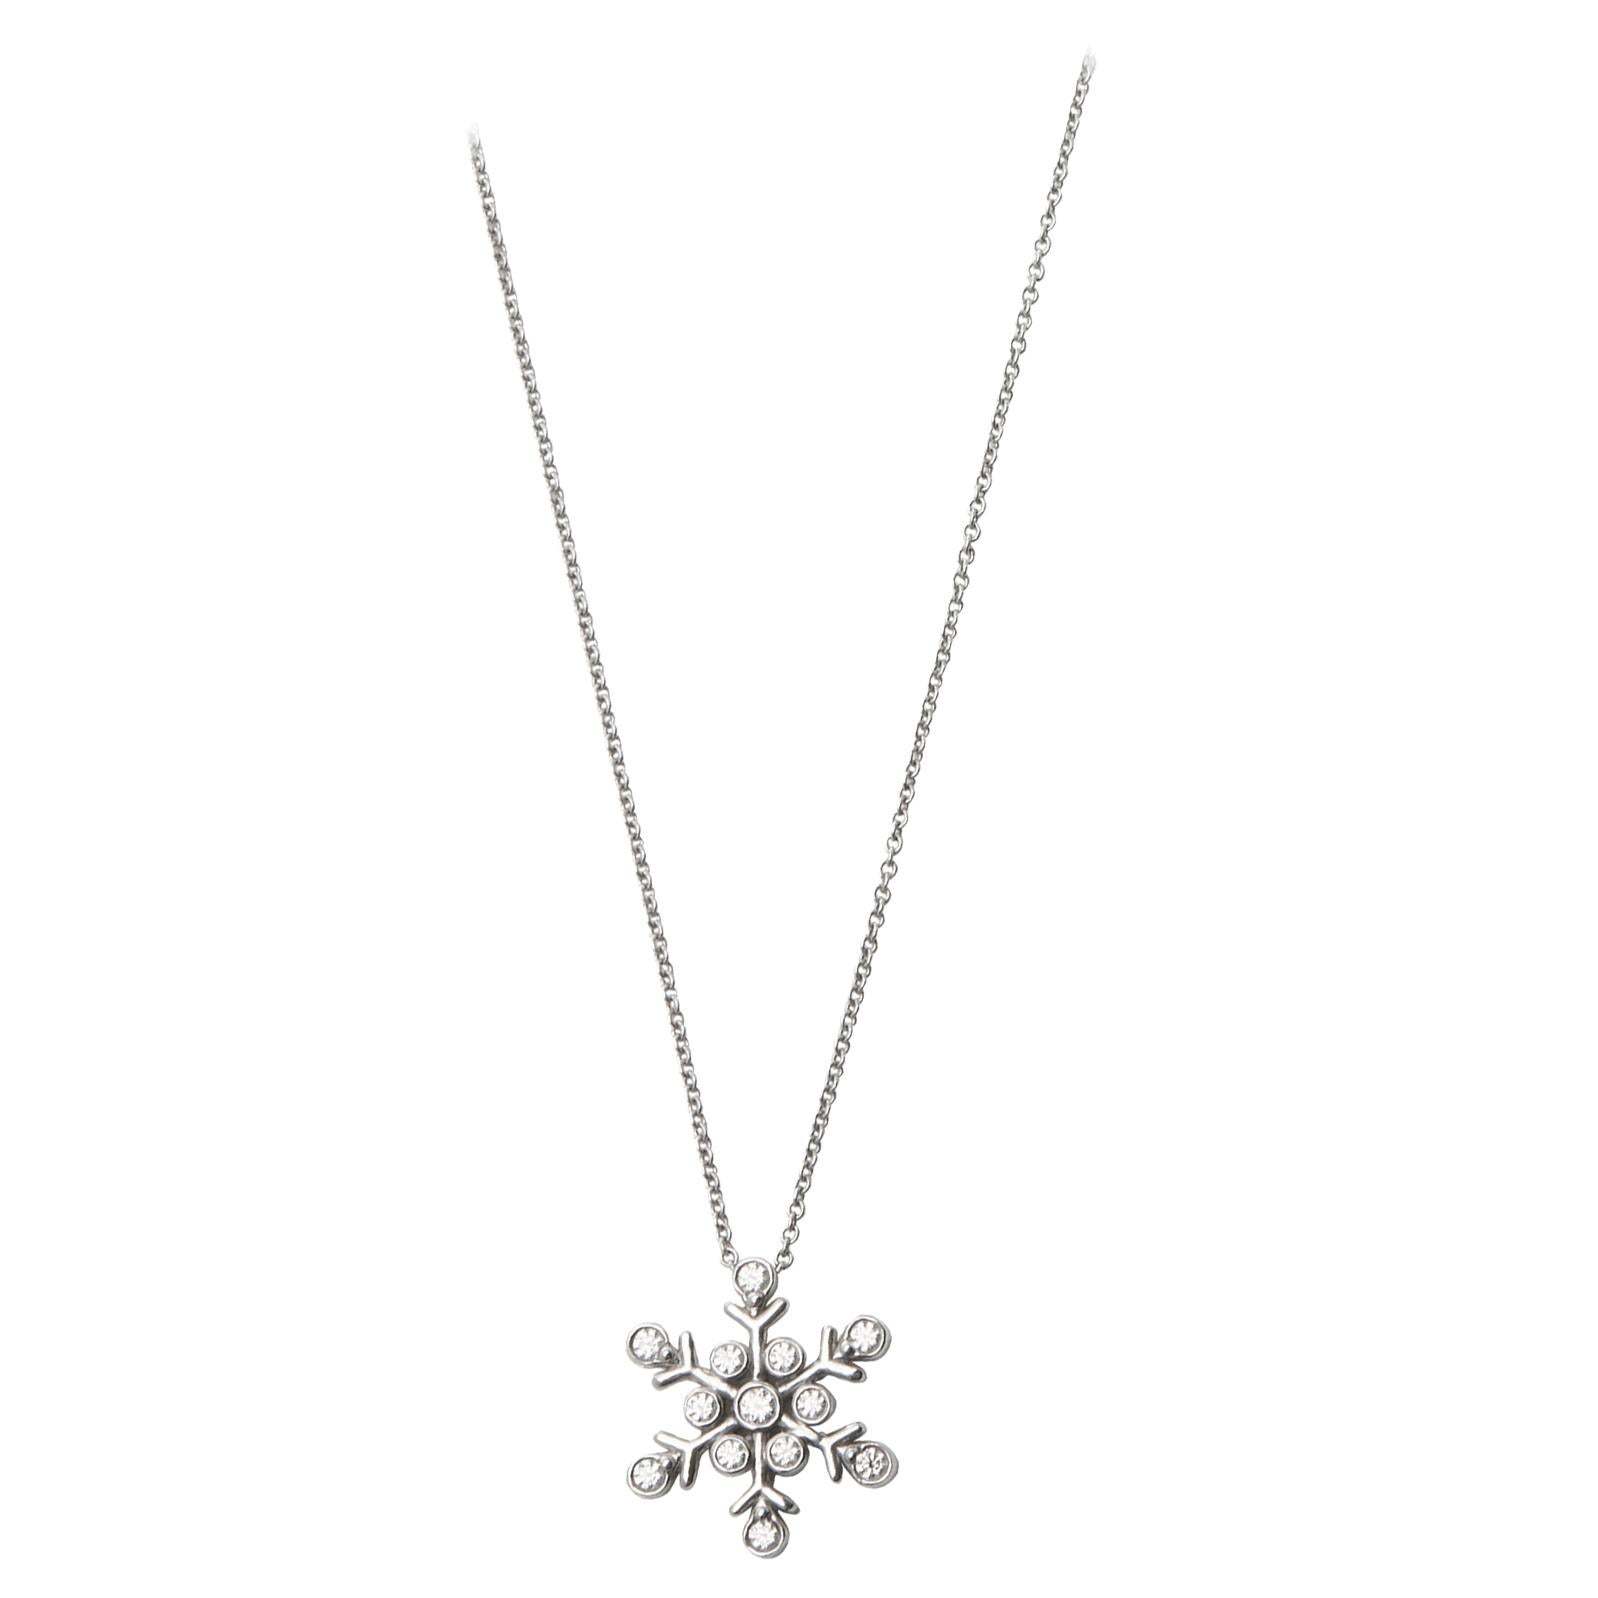 Platinum and Diamond Snowflake Necklace, Tiffany & Co. (Lot 3048 - Estate  Jewelry & Sterling SilverOct 29, 2021, 10:00am)